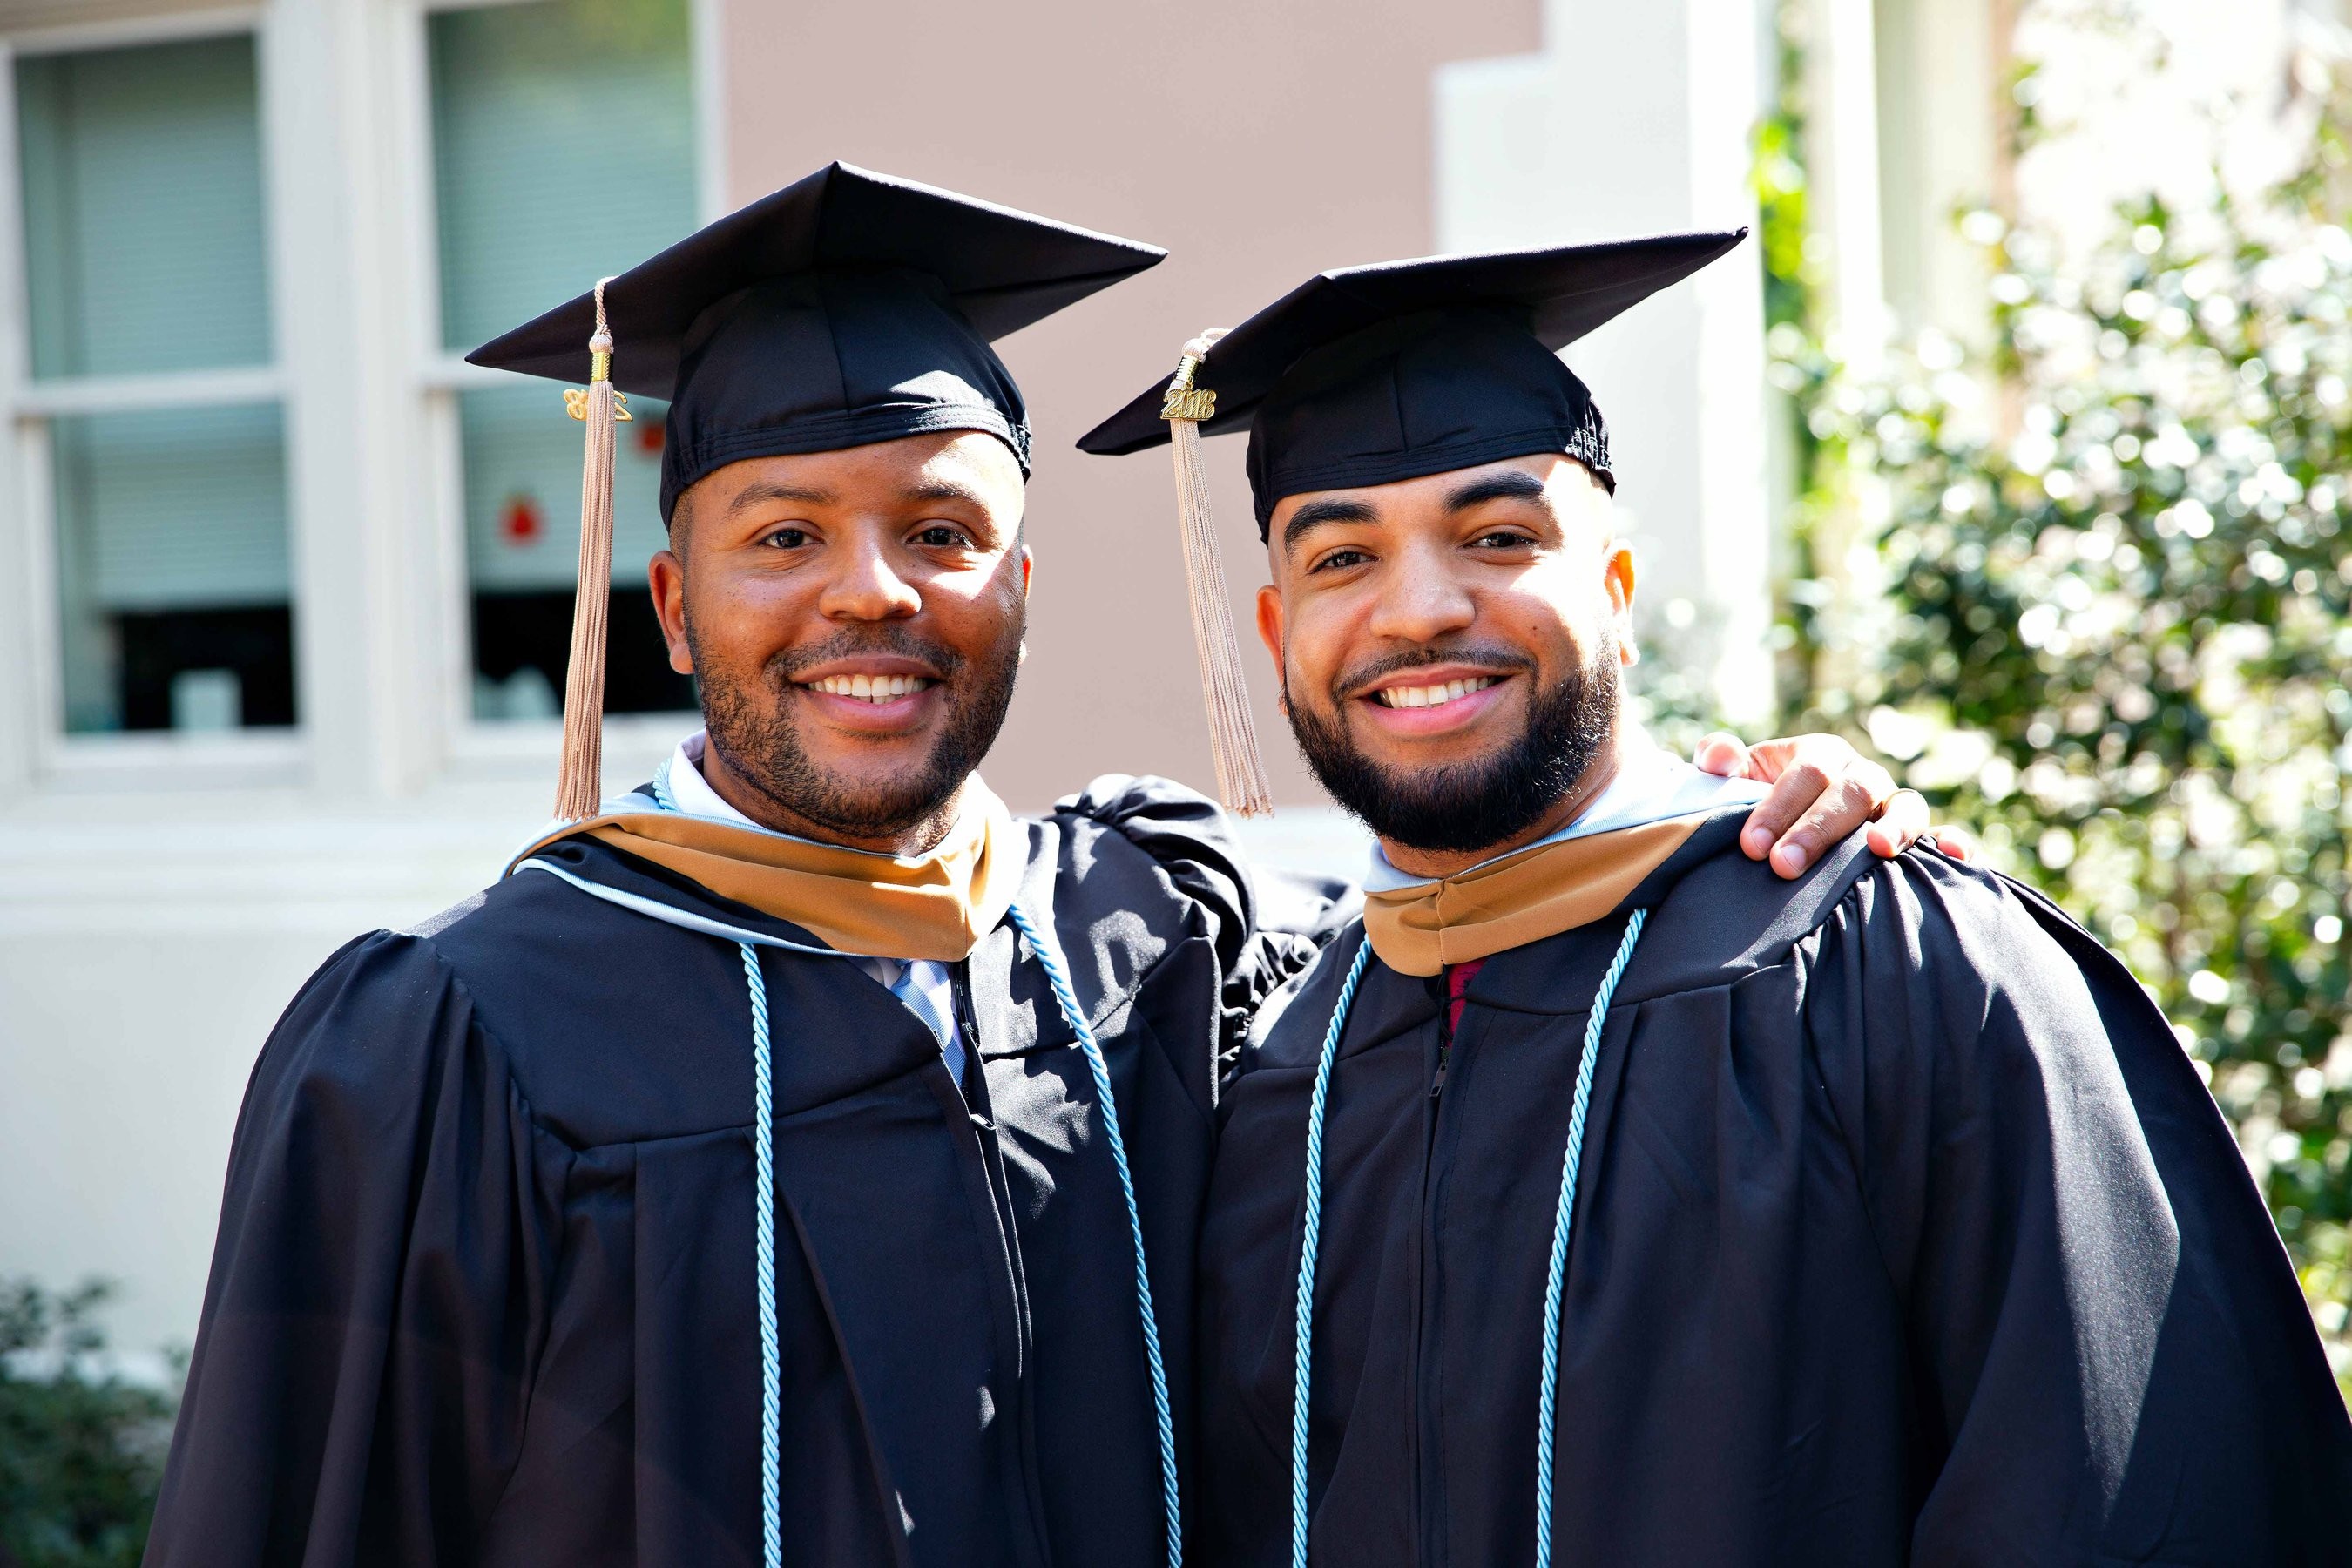 Two MBA students posing for a photo in their cap and gowns on graduation day